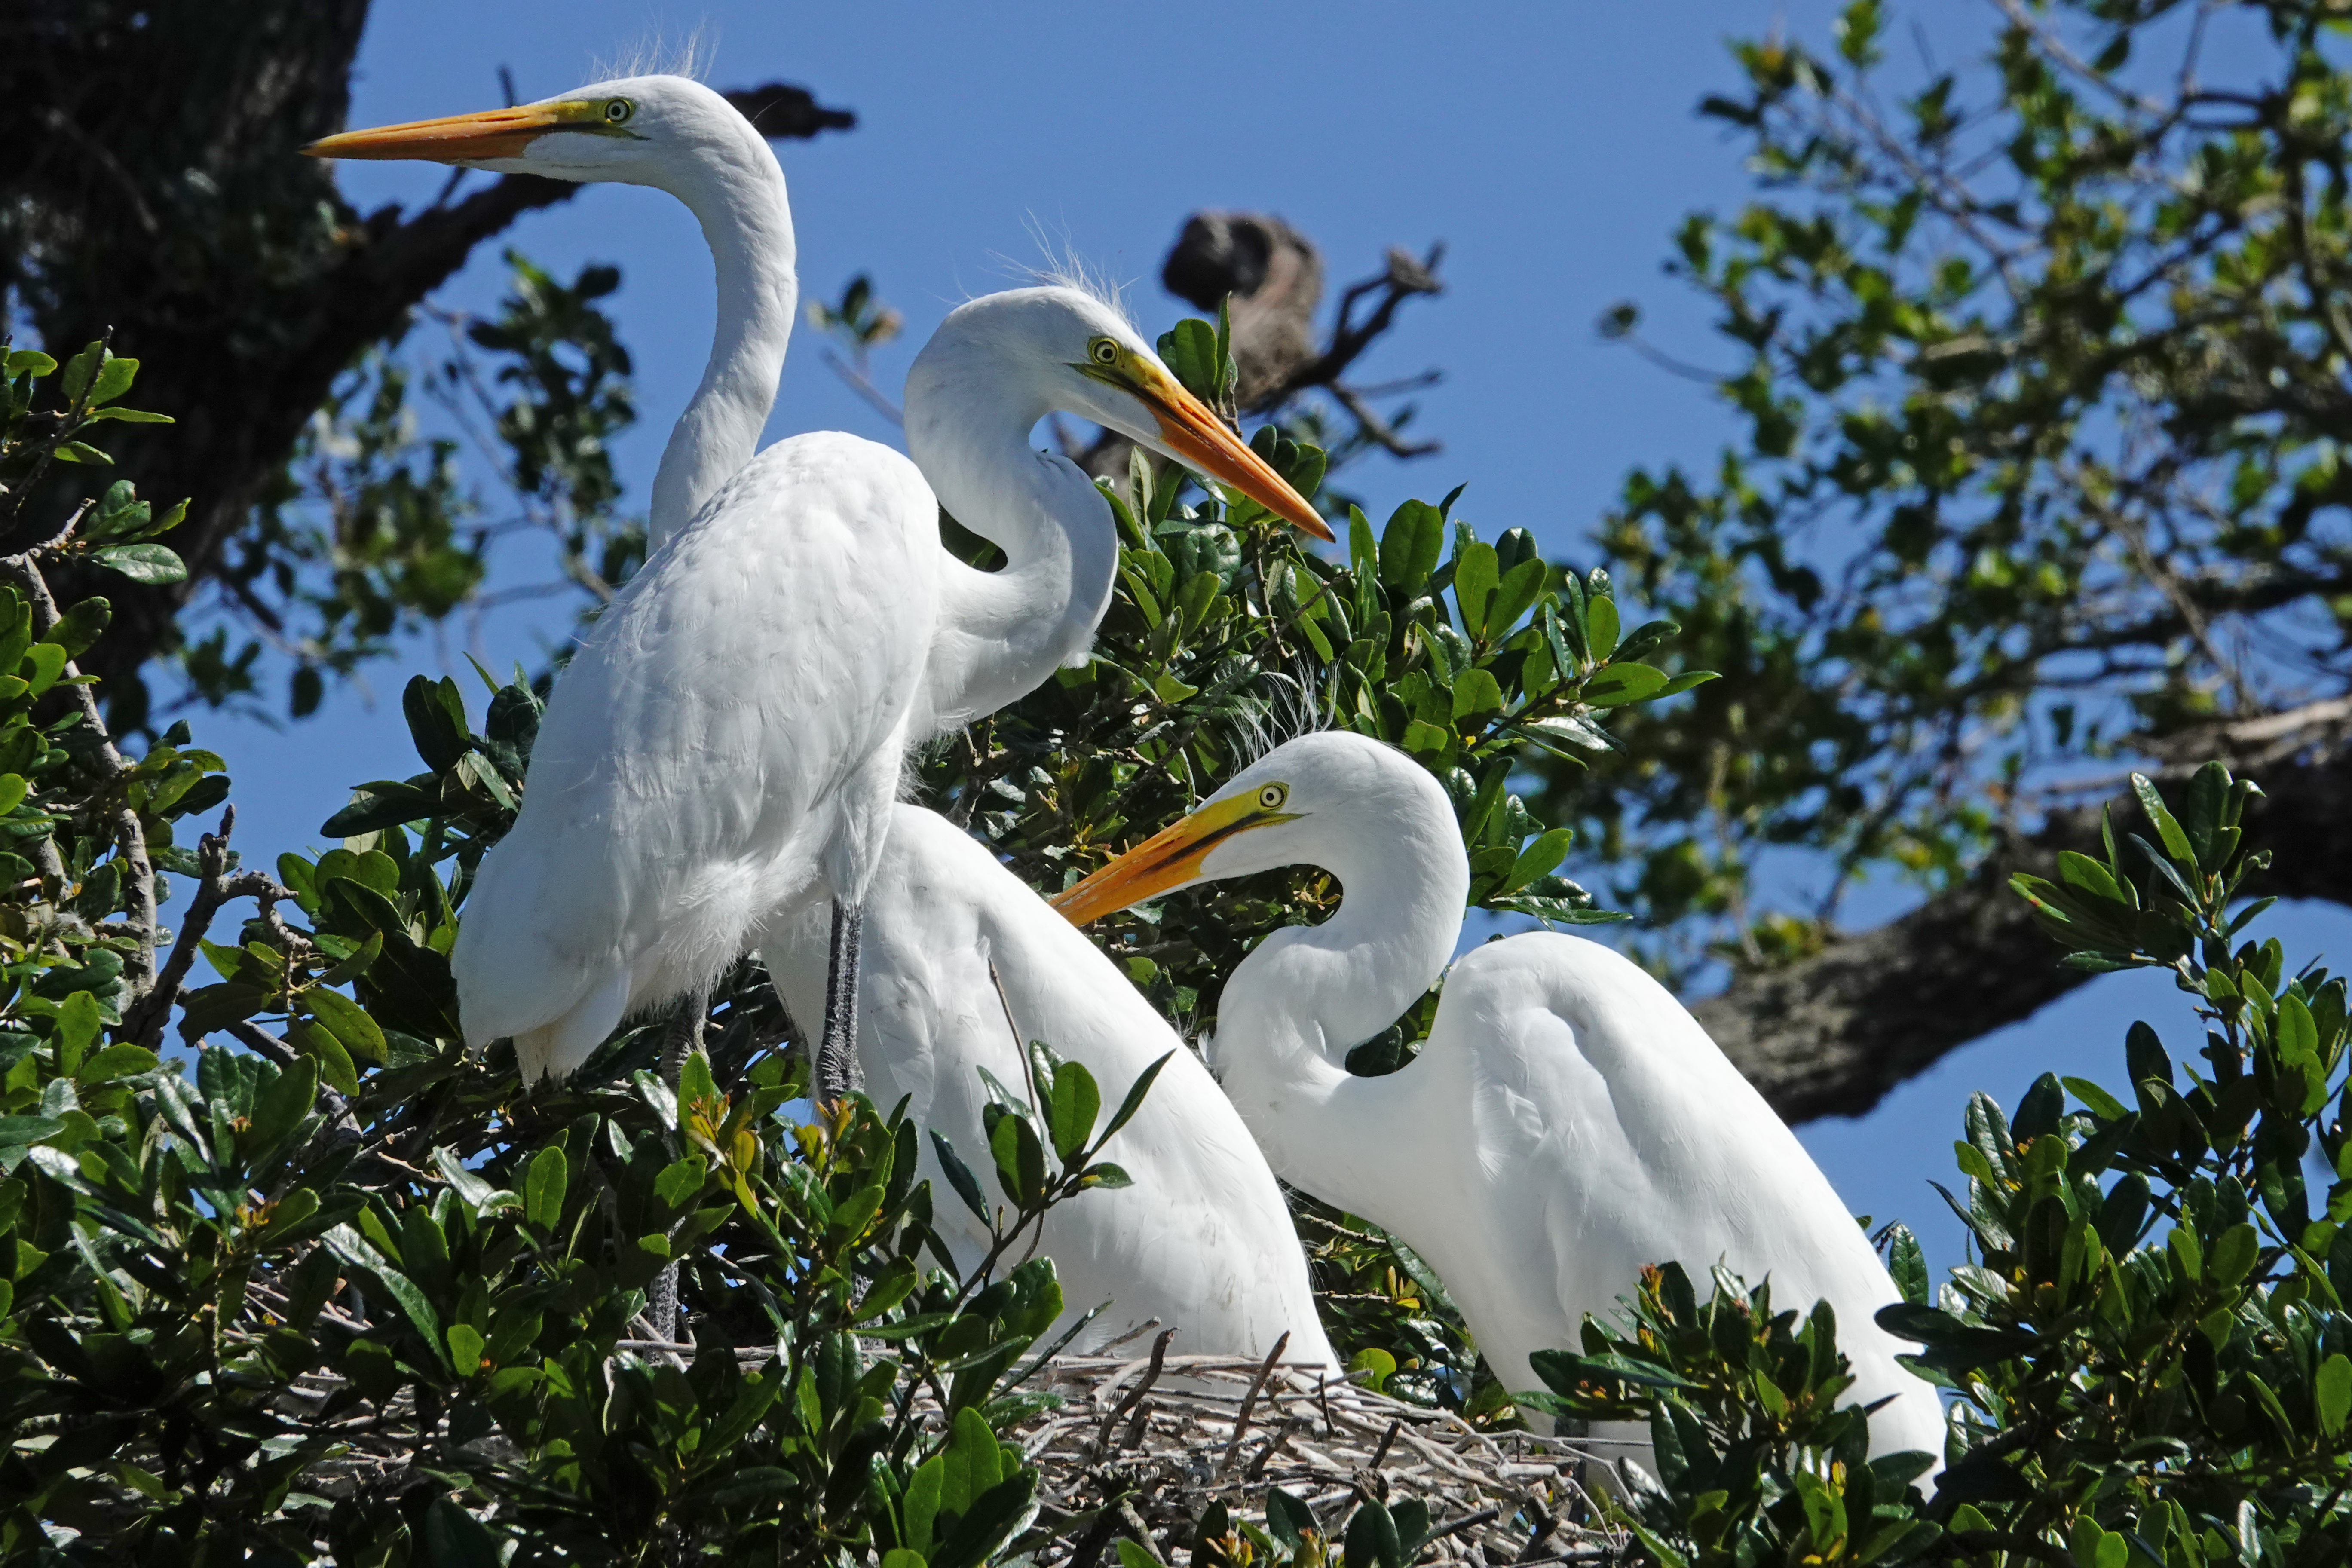 Great egret adult (left rear) and chicks  -  St. Johns County, Florida